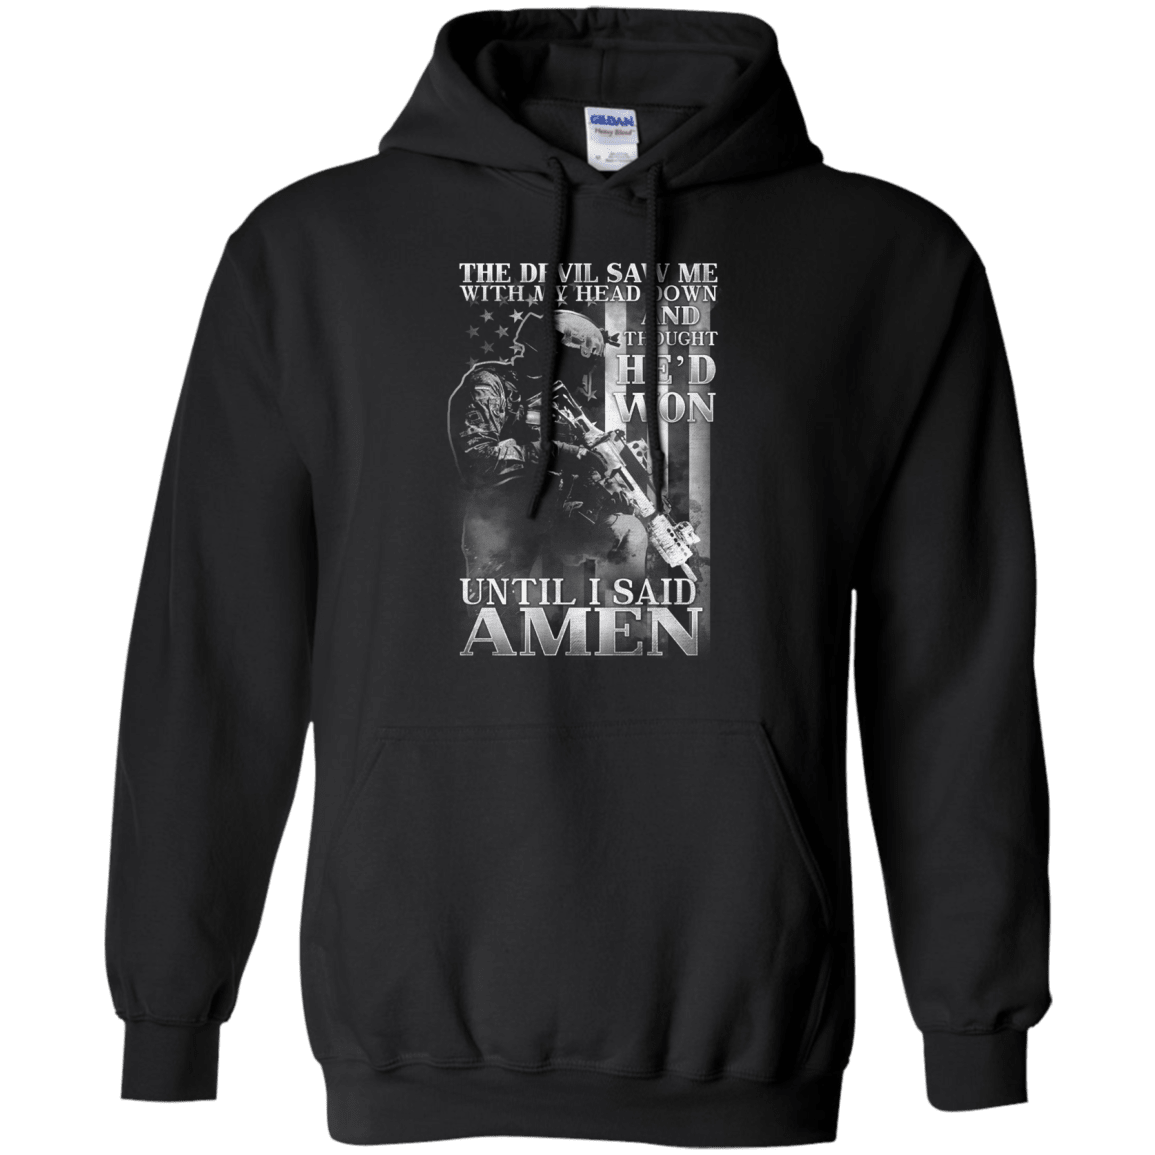 Military T-Shirt "The Devil Saw Me With My Head Down Amen Men" Front-TShirt-General-Veterans Nation